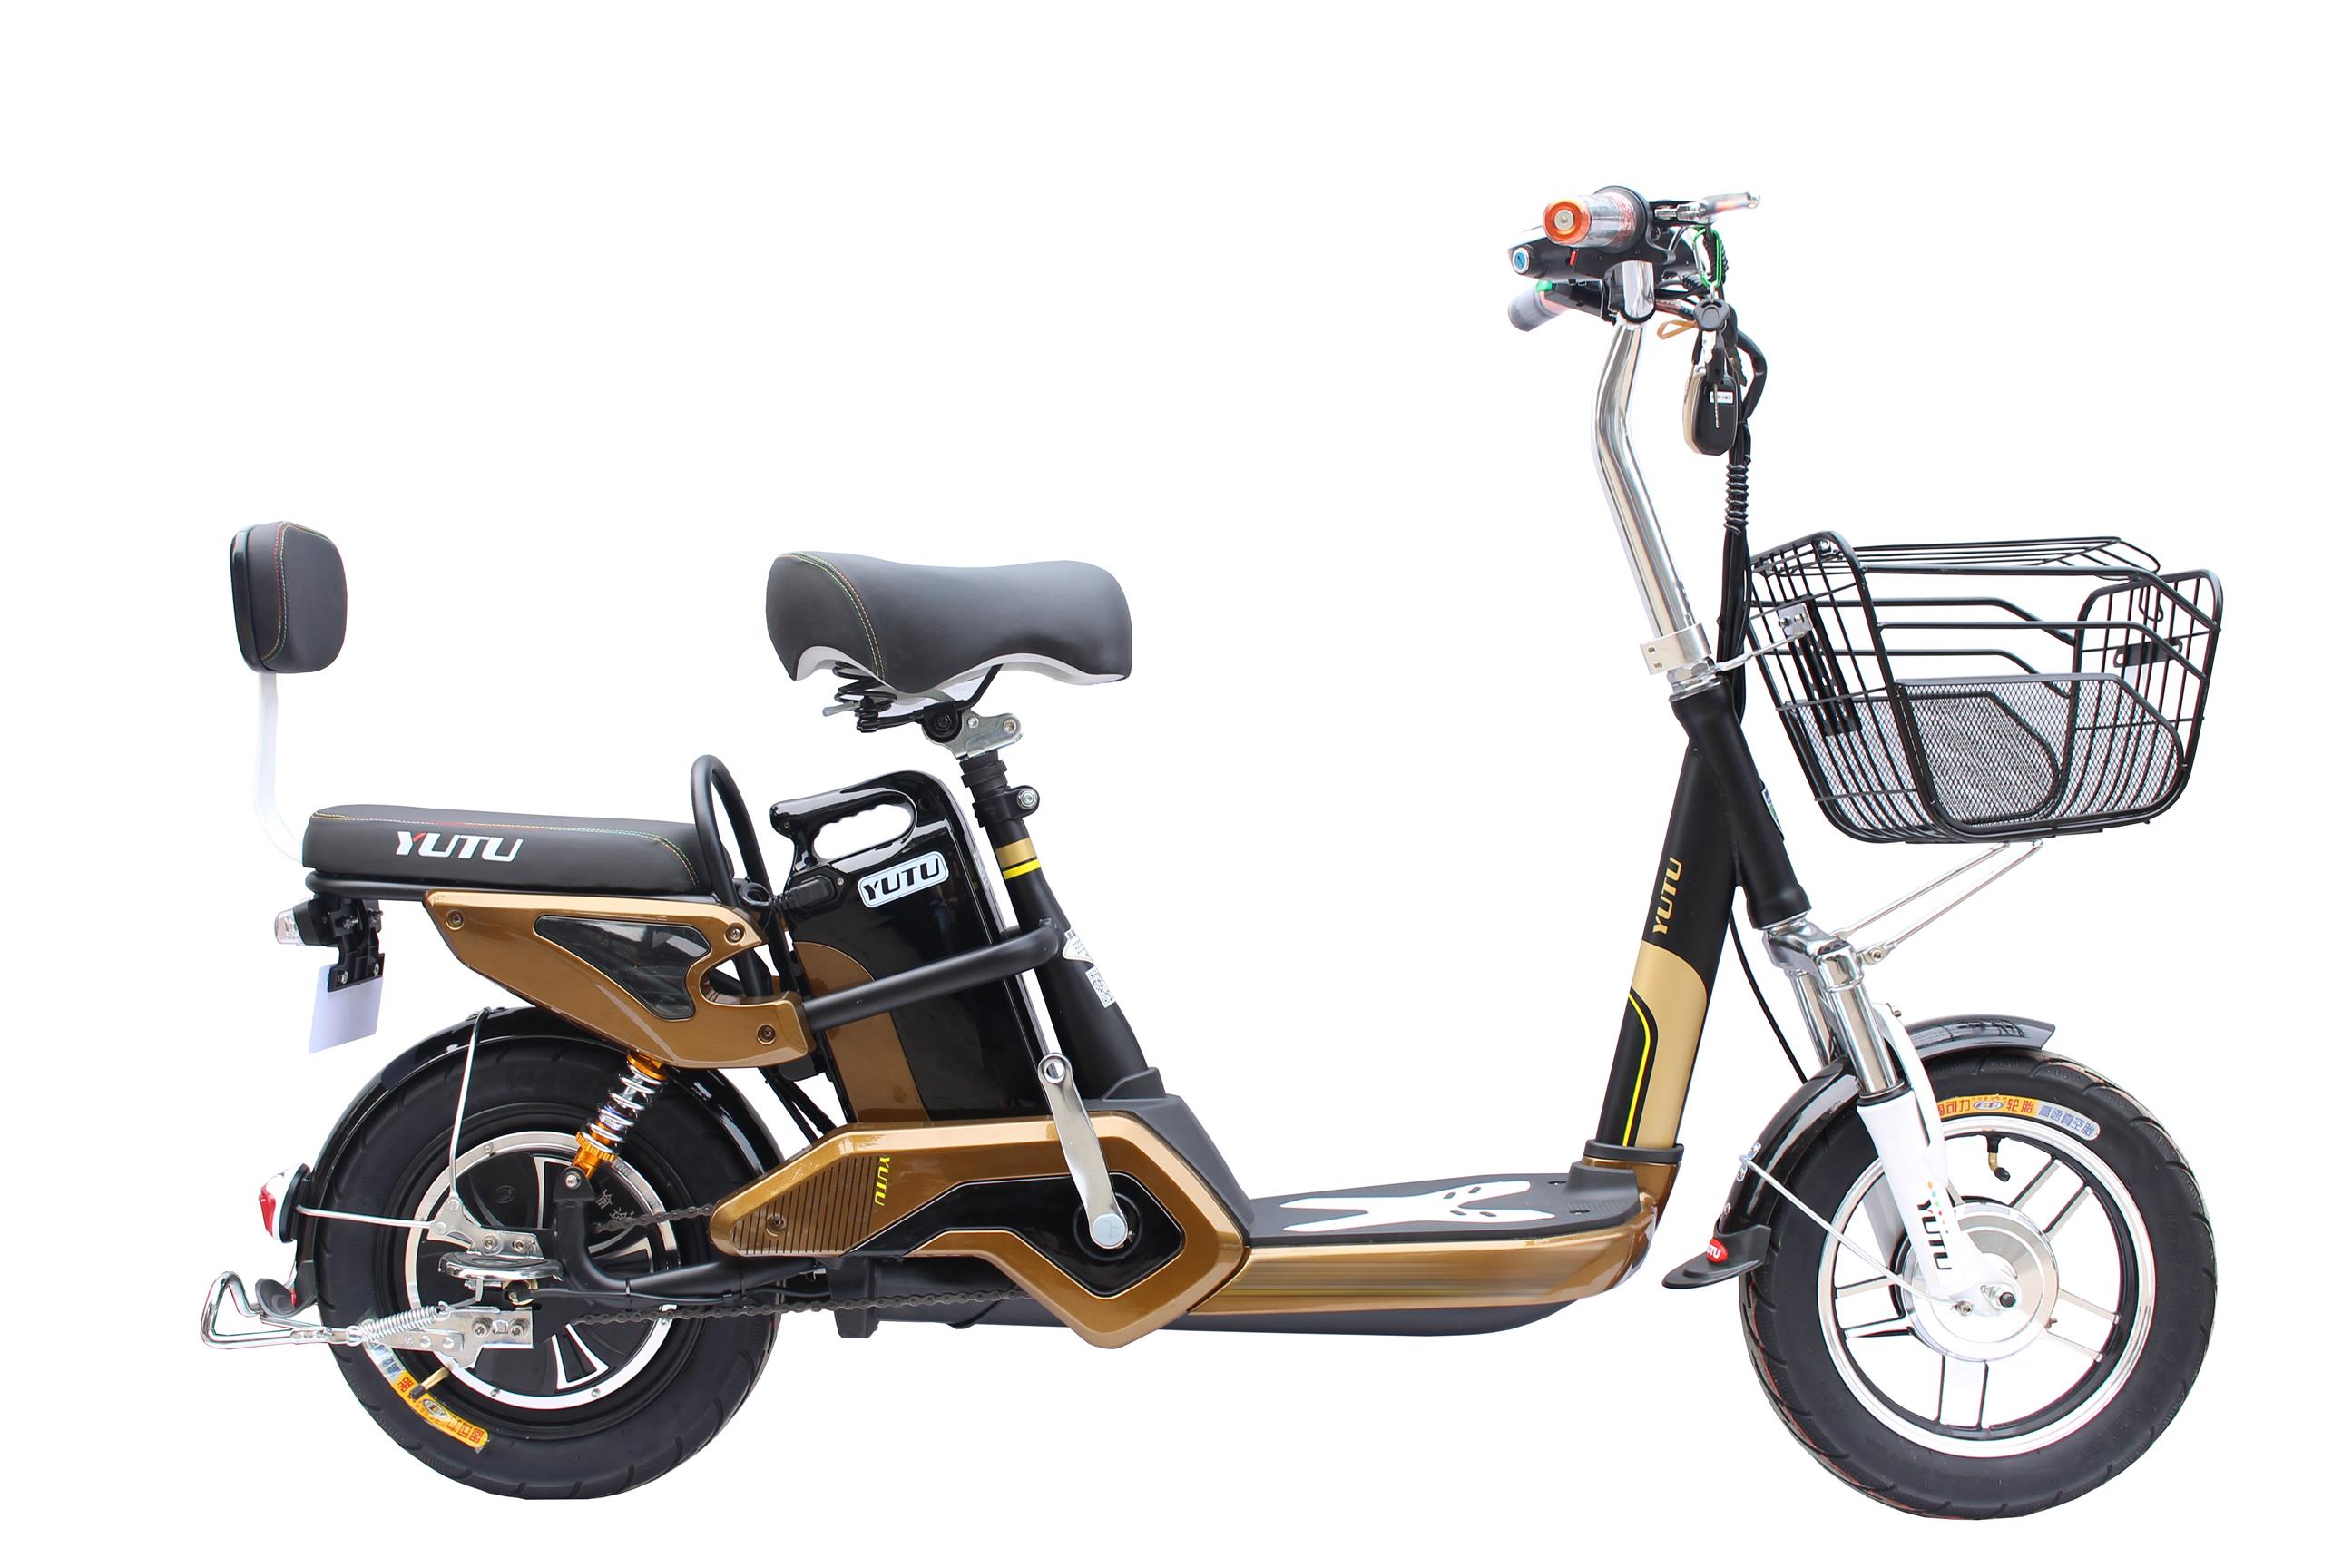 ELECTRIC BICYCLE EDIFIER 5 (end 4/25/2020 4:08 PM)